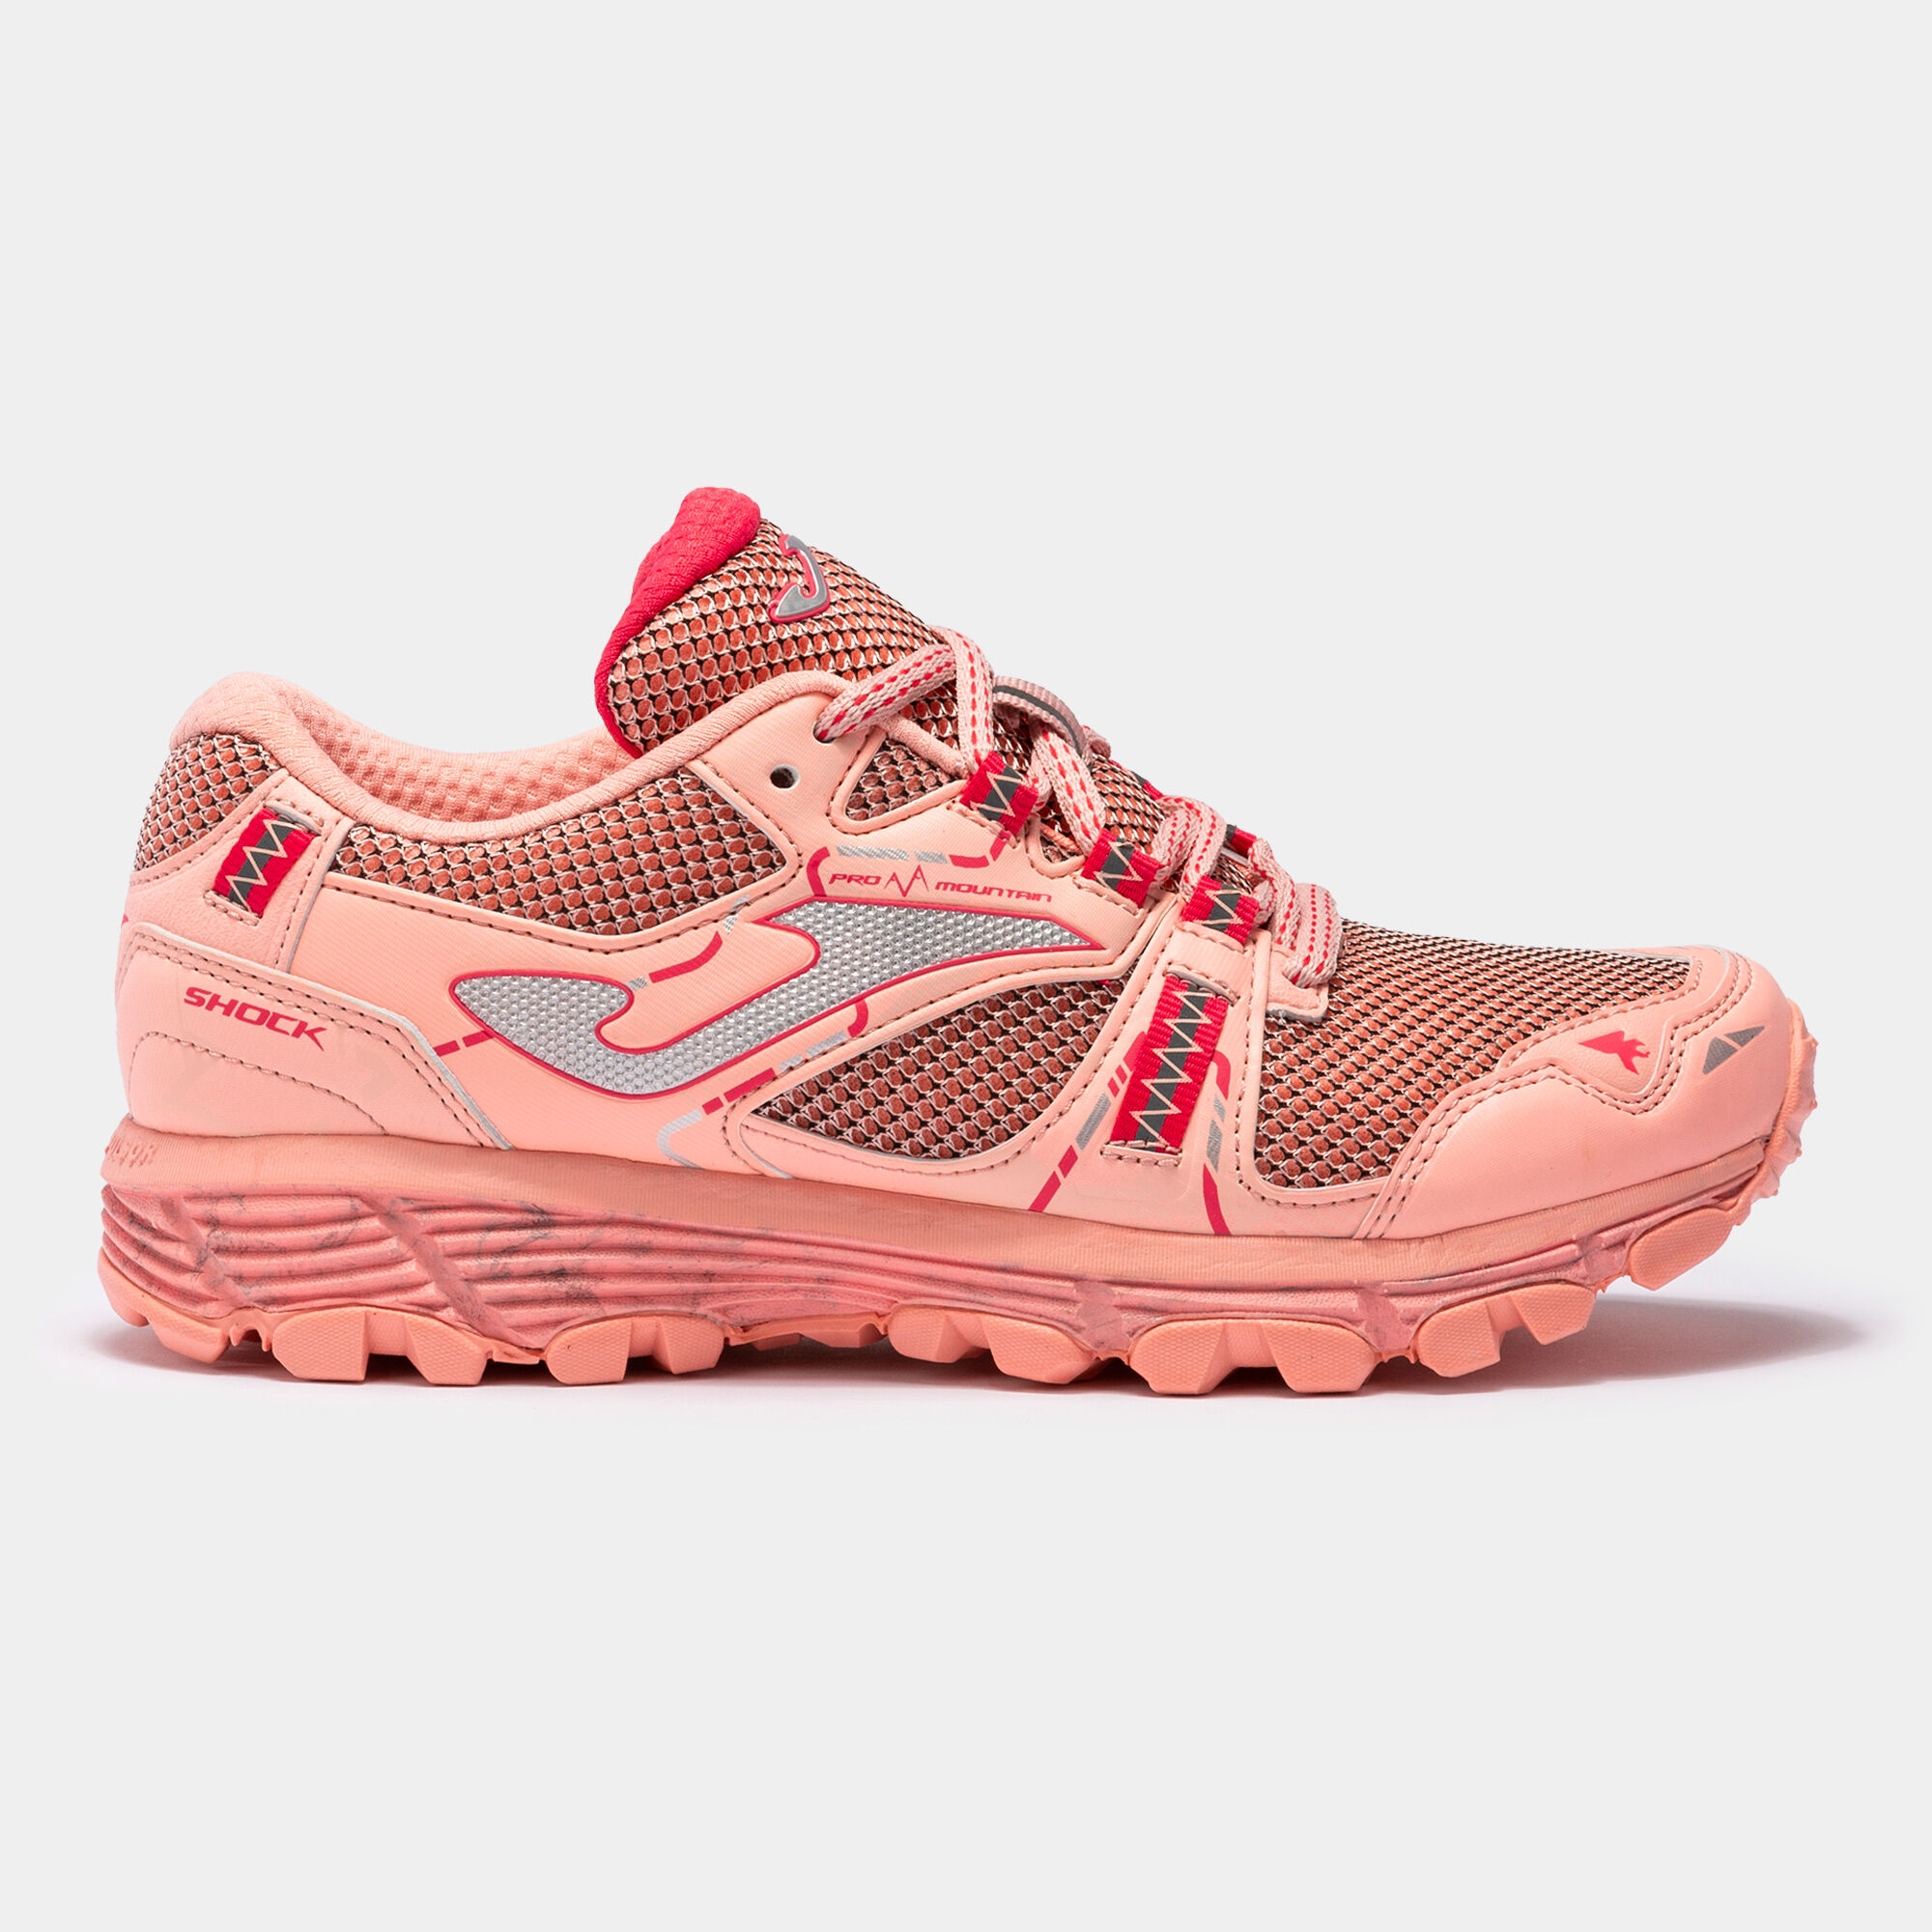 CHAUSSURES TRAIL RUNNING SHOCK 22 FEMME ROSE GRIS